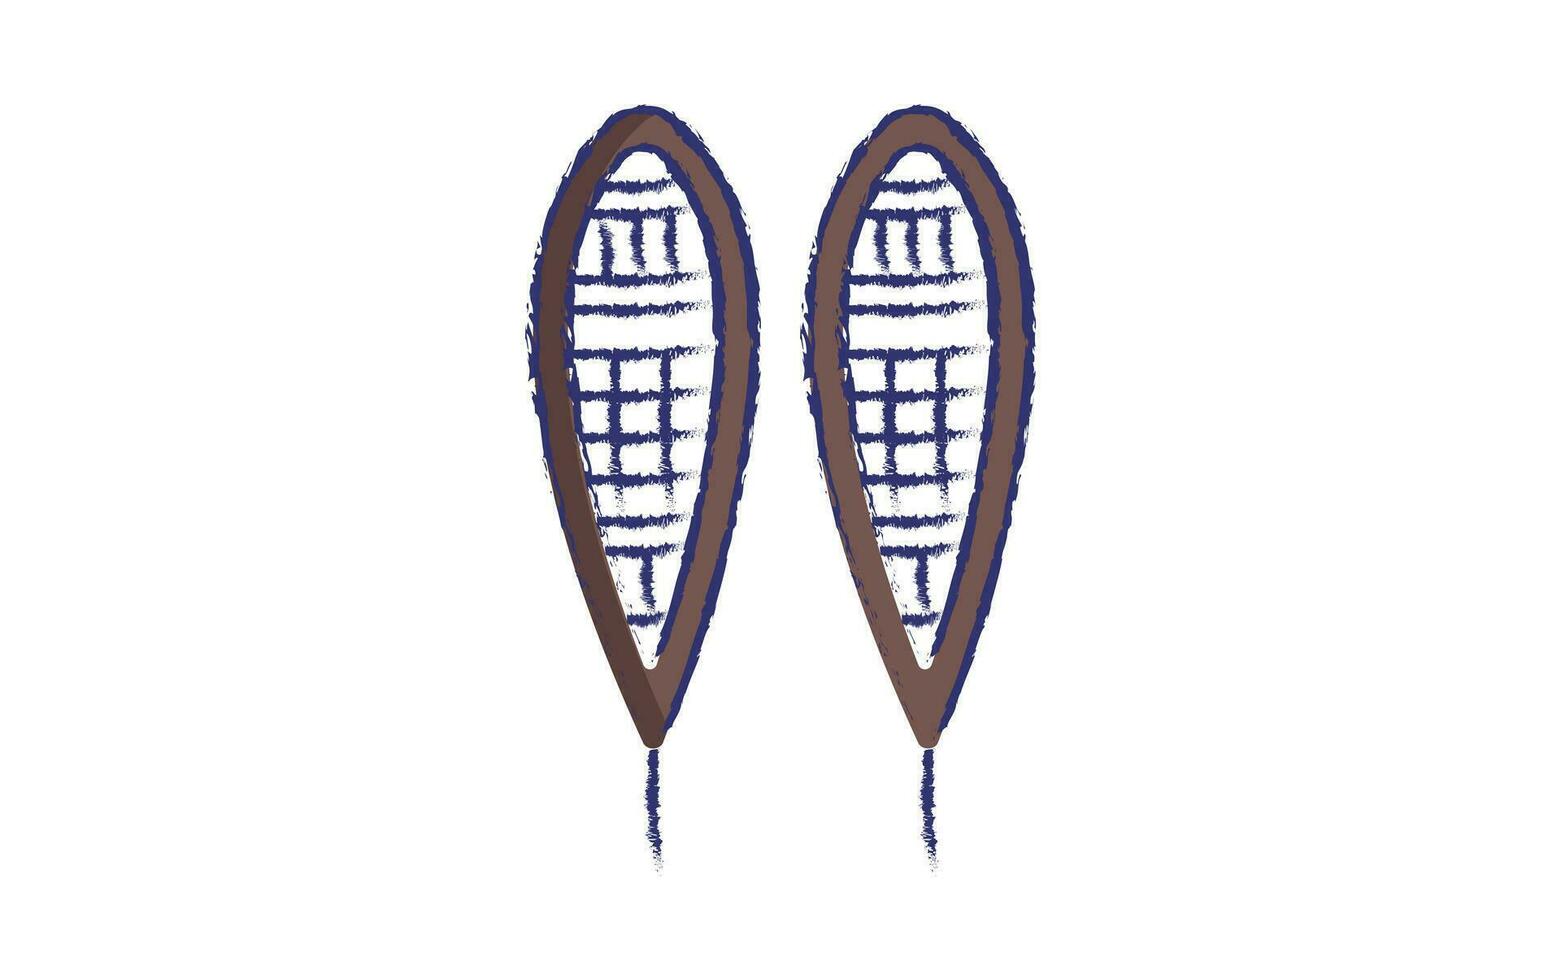 Snowshoes hand drawn illustration vector